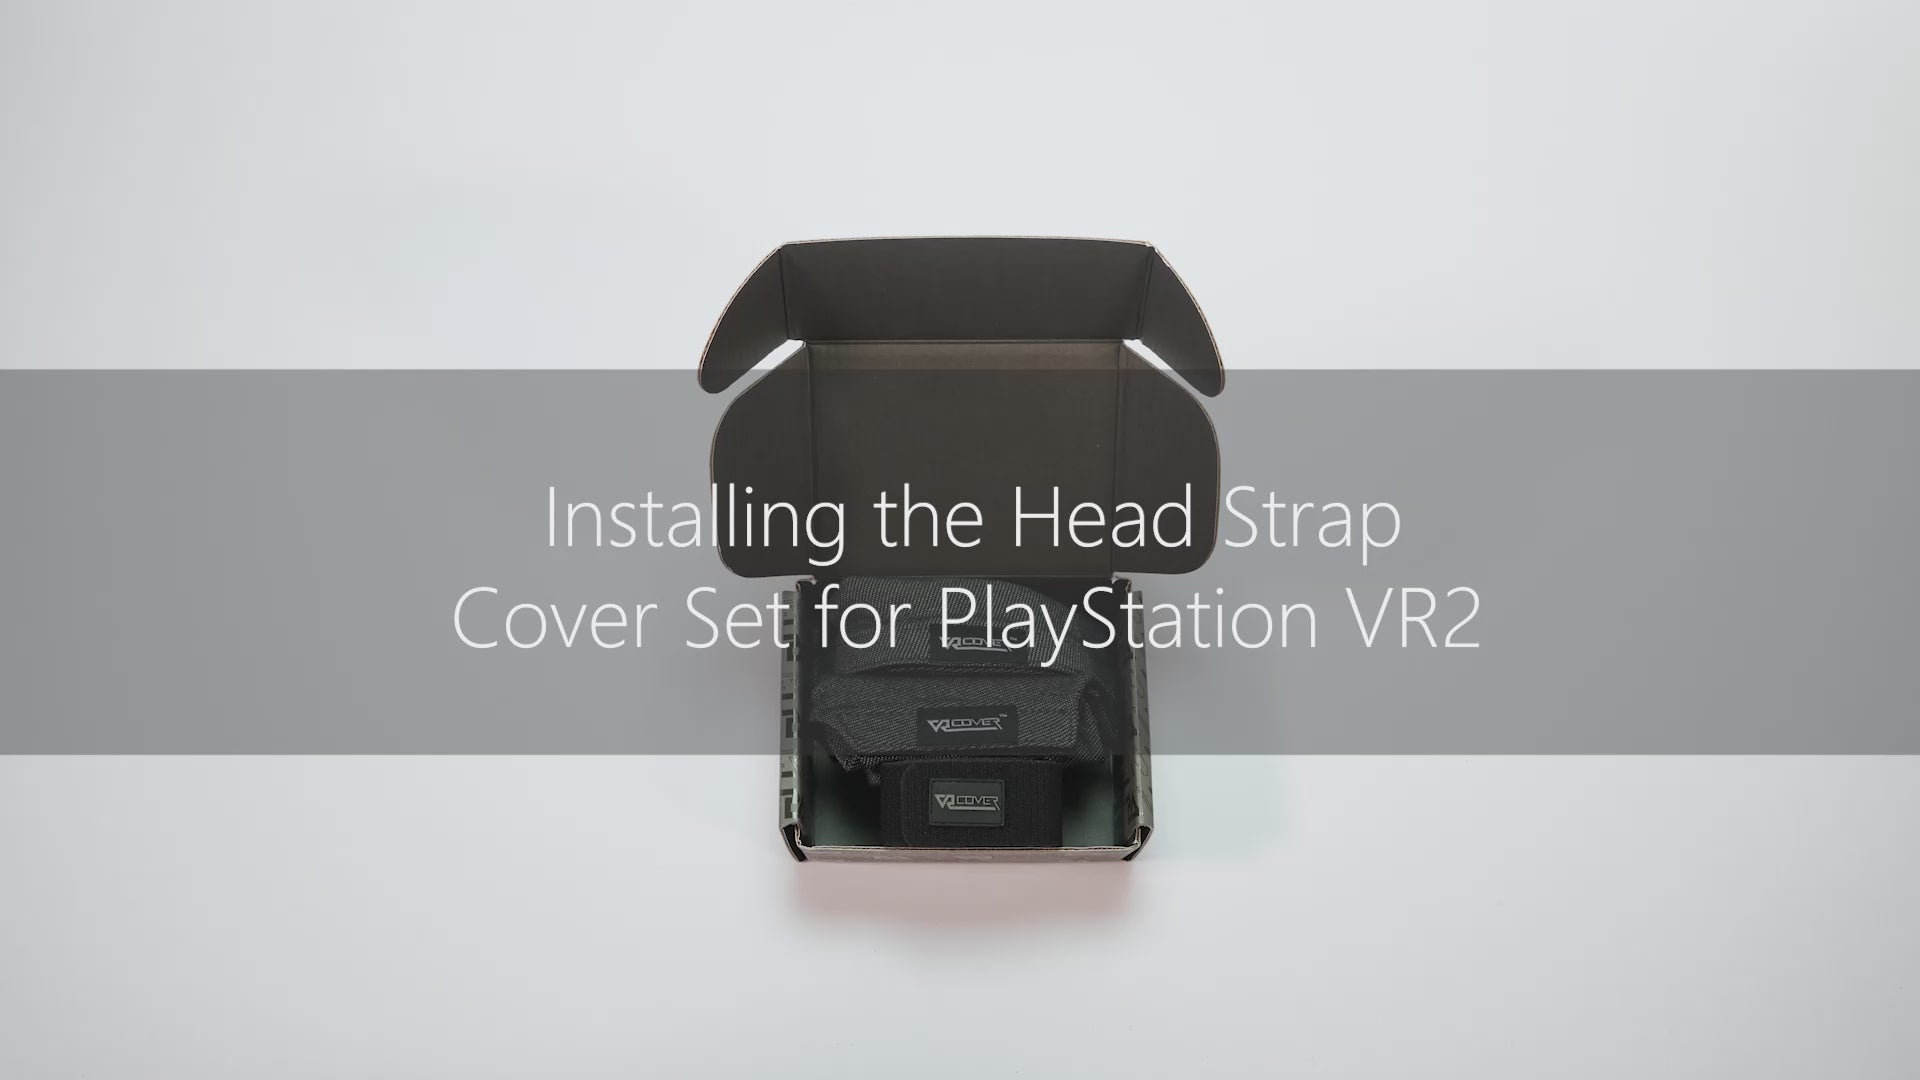 Head Strap Cover Set for PlayStation VR2 – VR Cover International